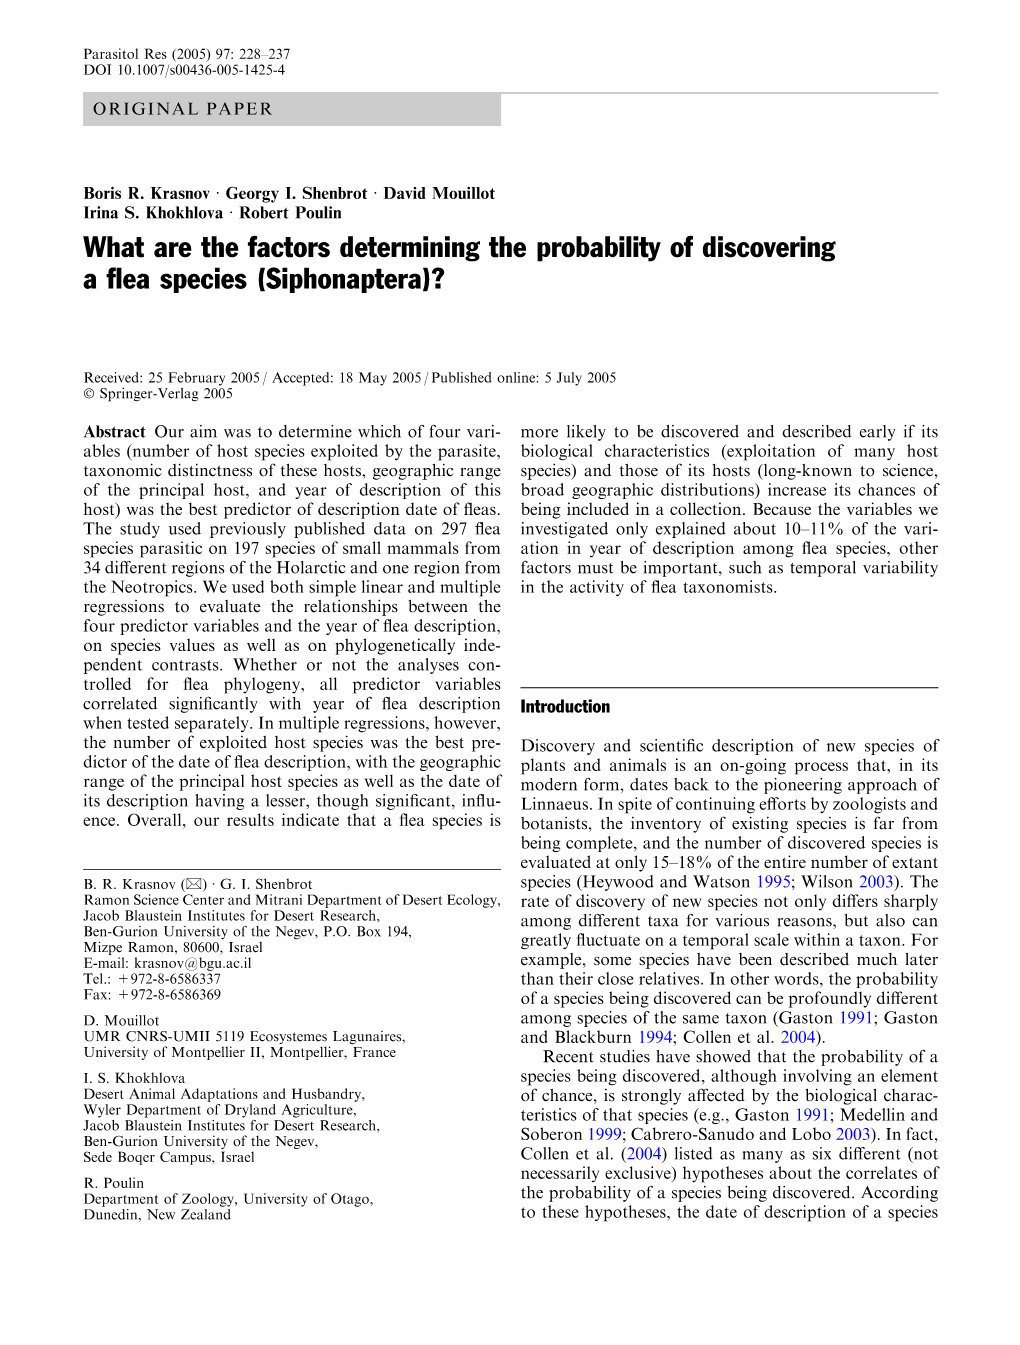 What Are the Factors Determining the Probability of Discovering a Flea Species (Siphonaptera)?